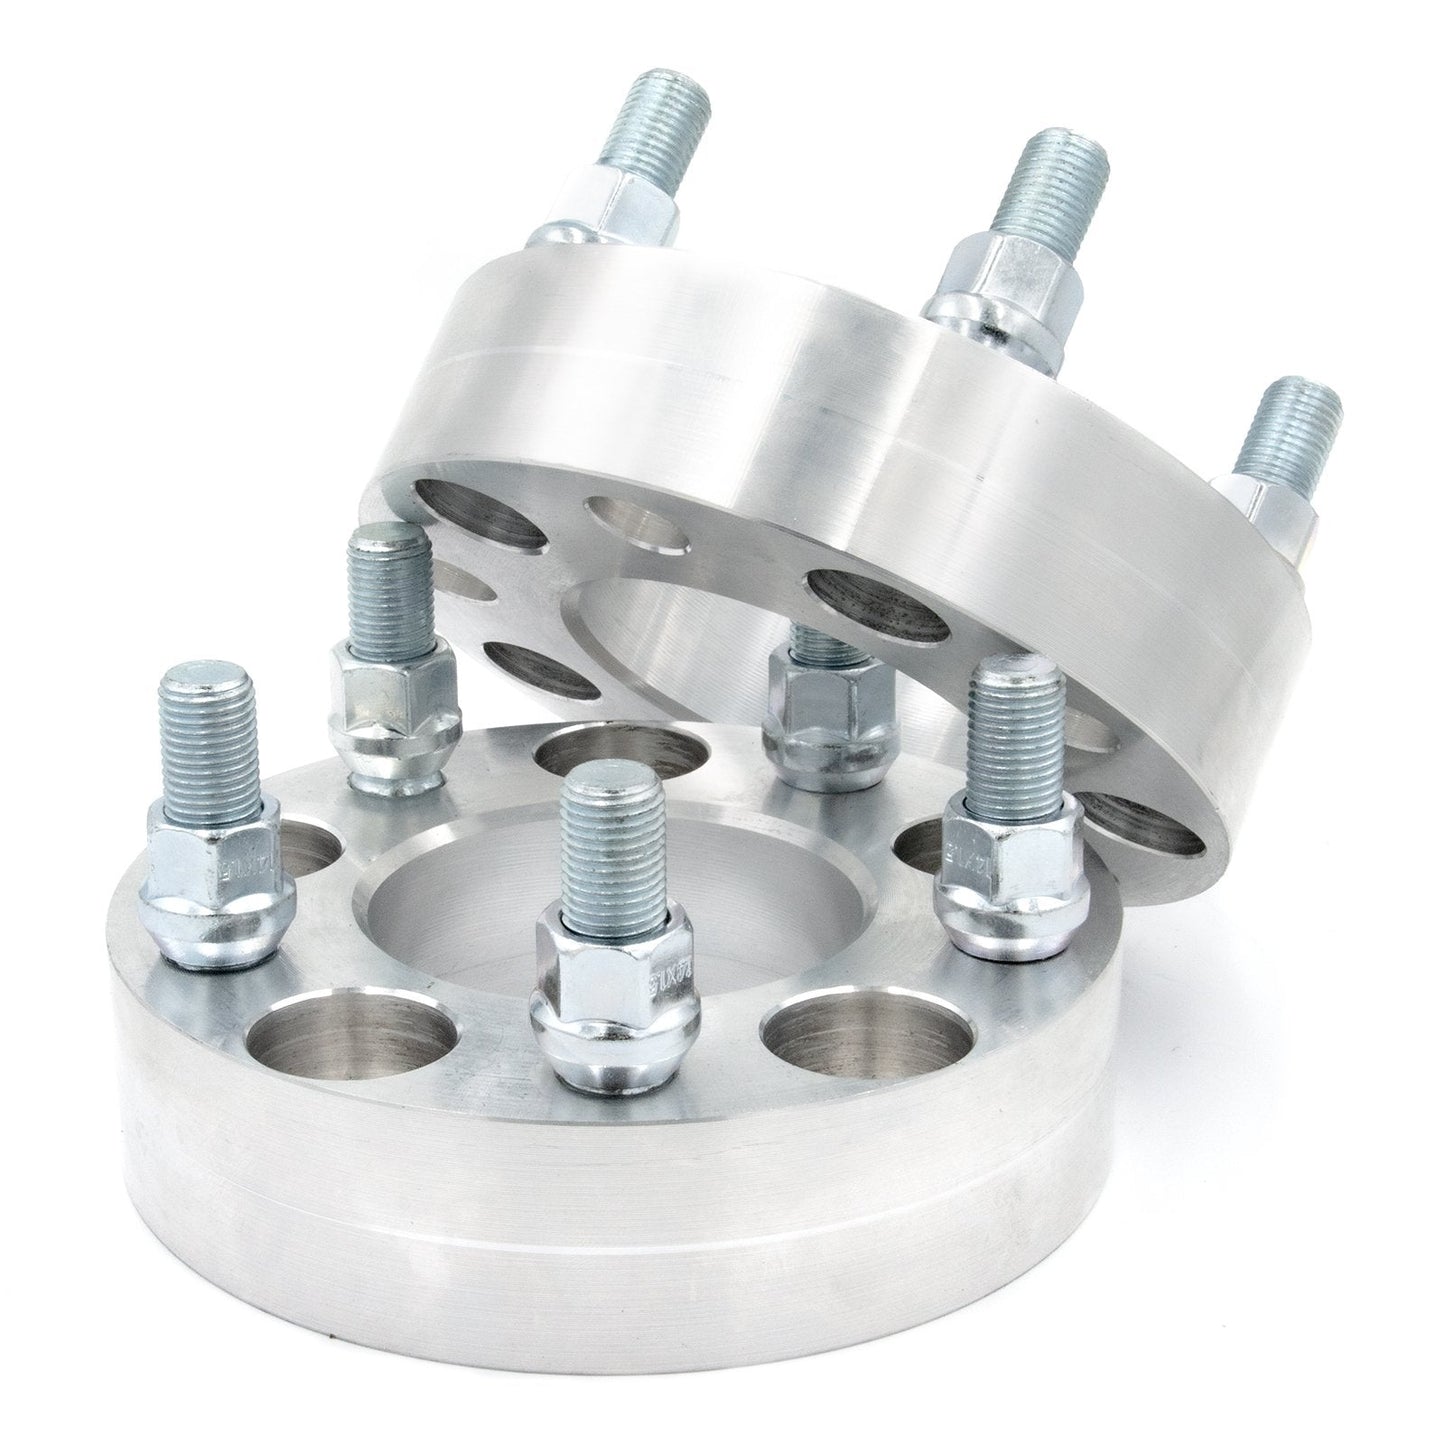 5x130 to 5x135 Wheel Spacer/Adapter - Thickness: 3/4"- 4"